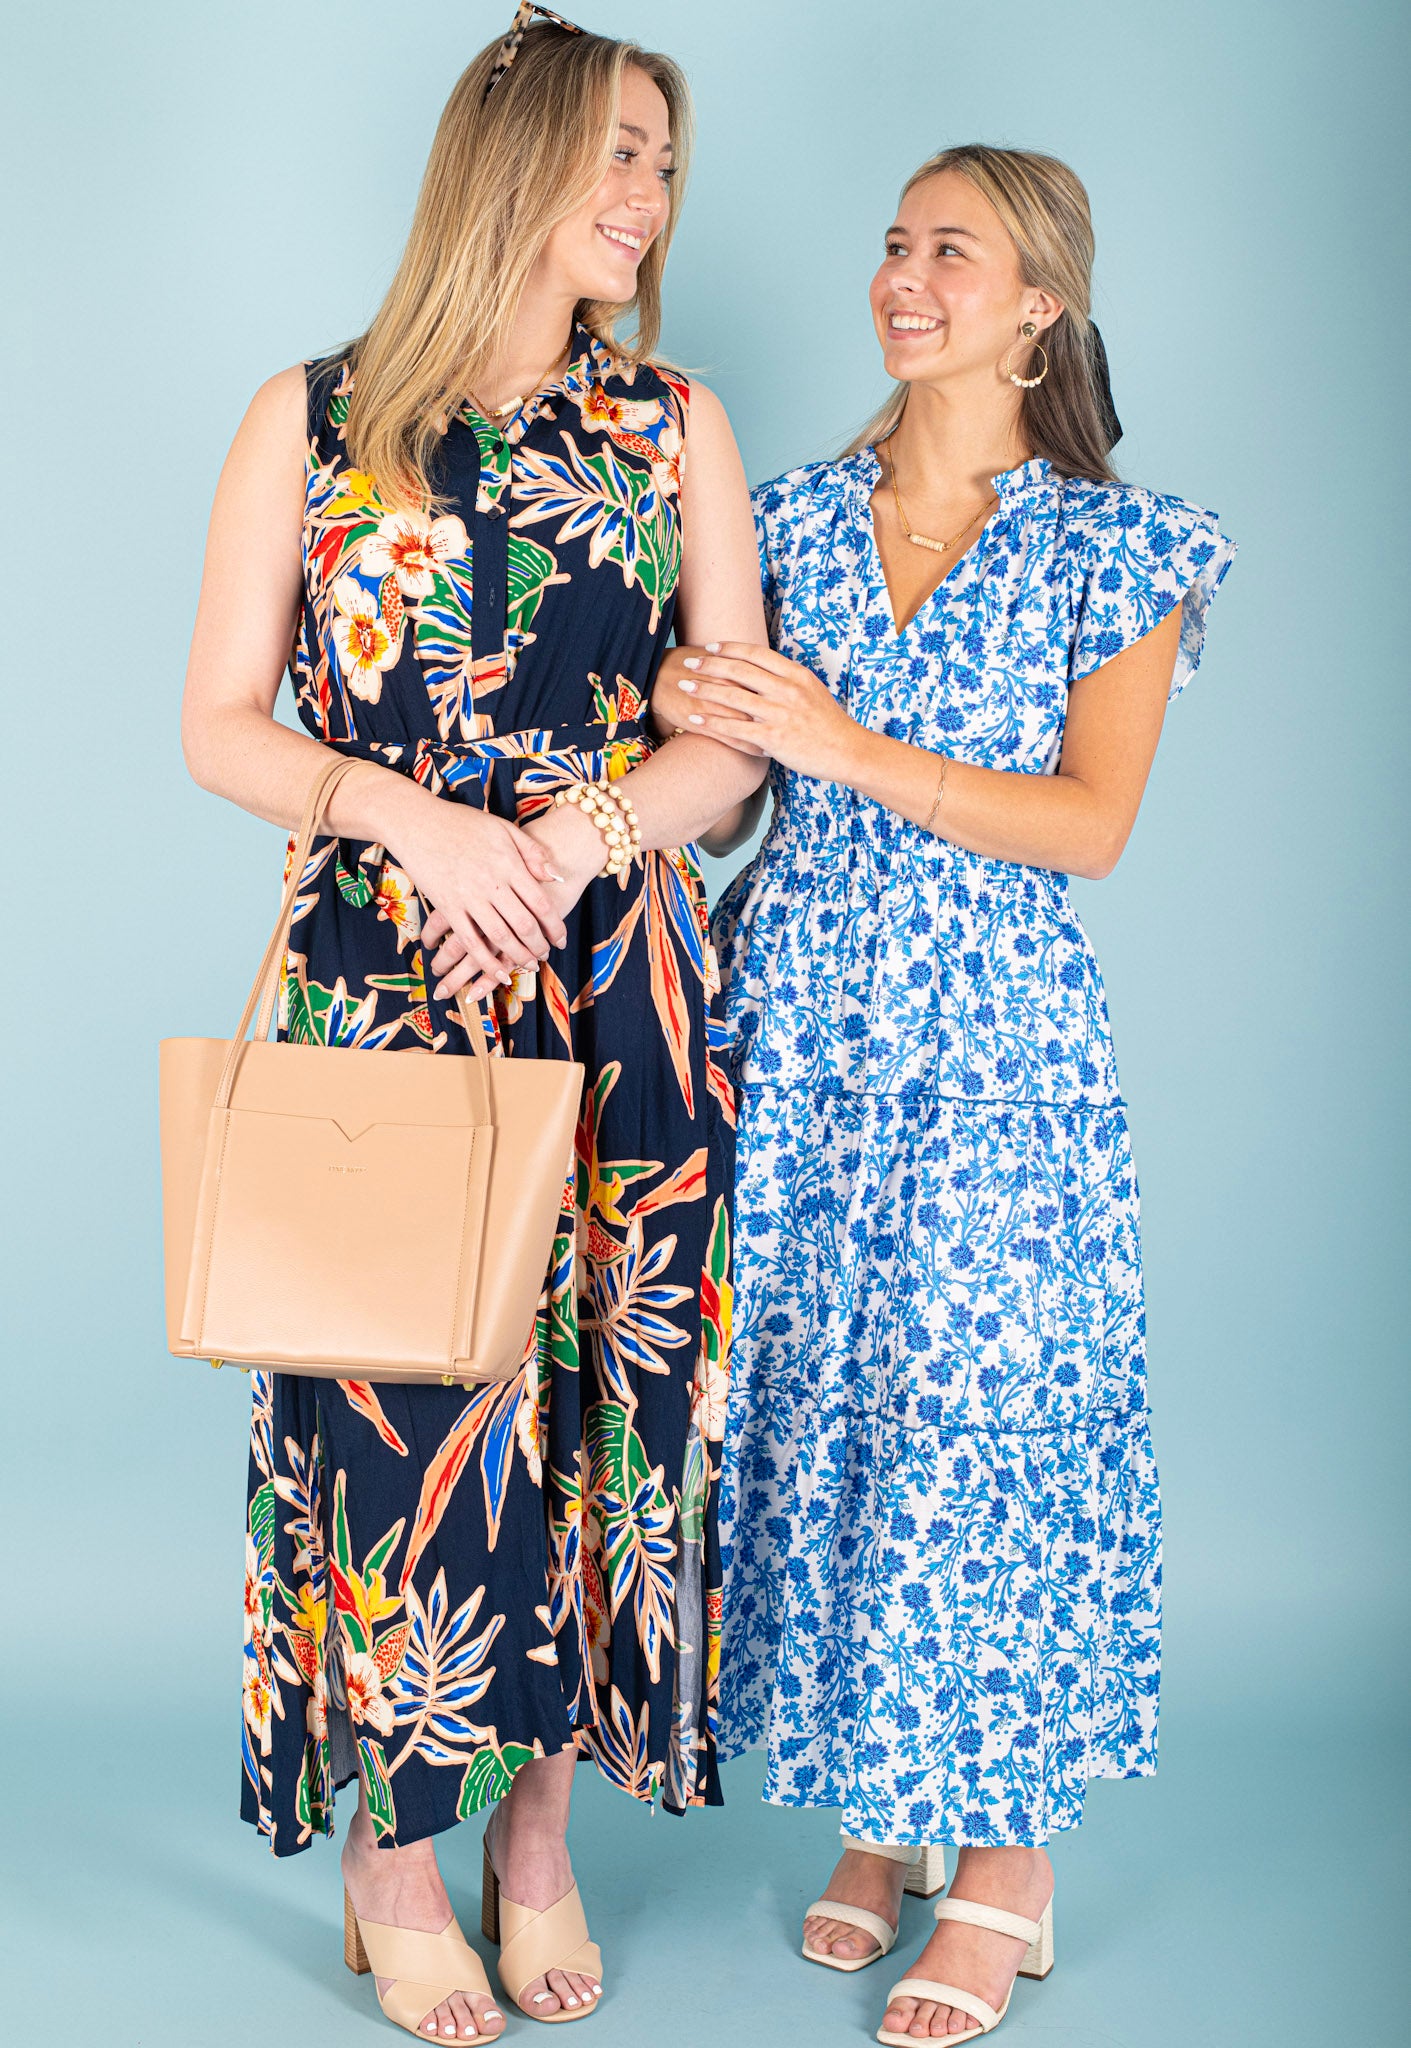 Two woman standing together in floral maxi dresses